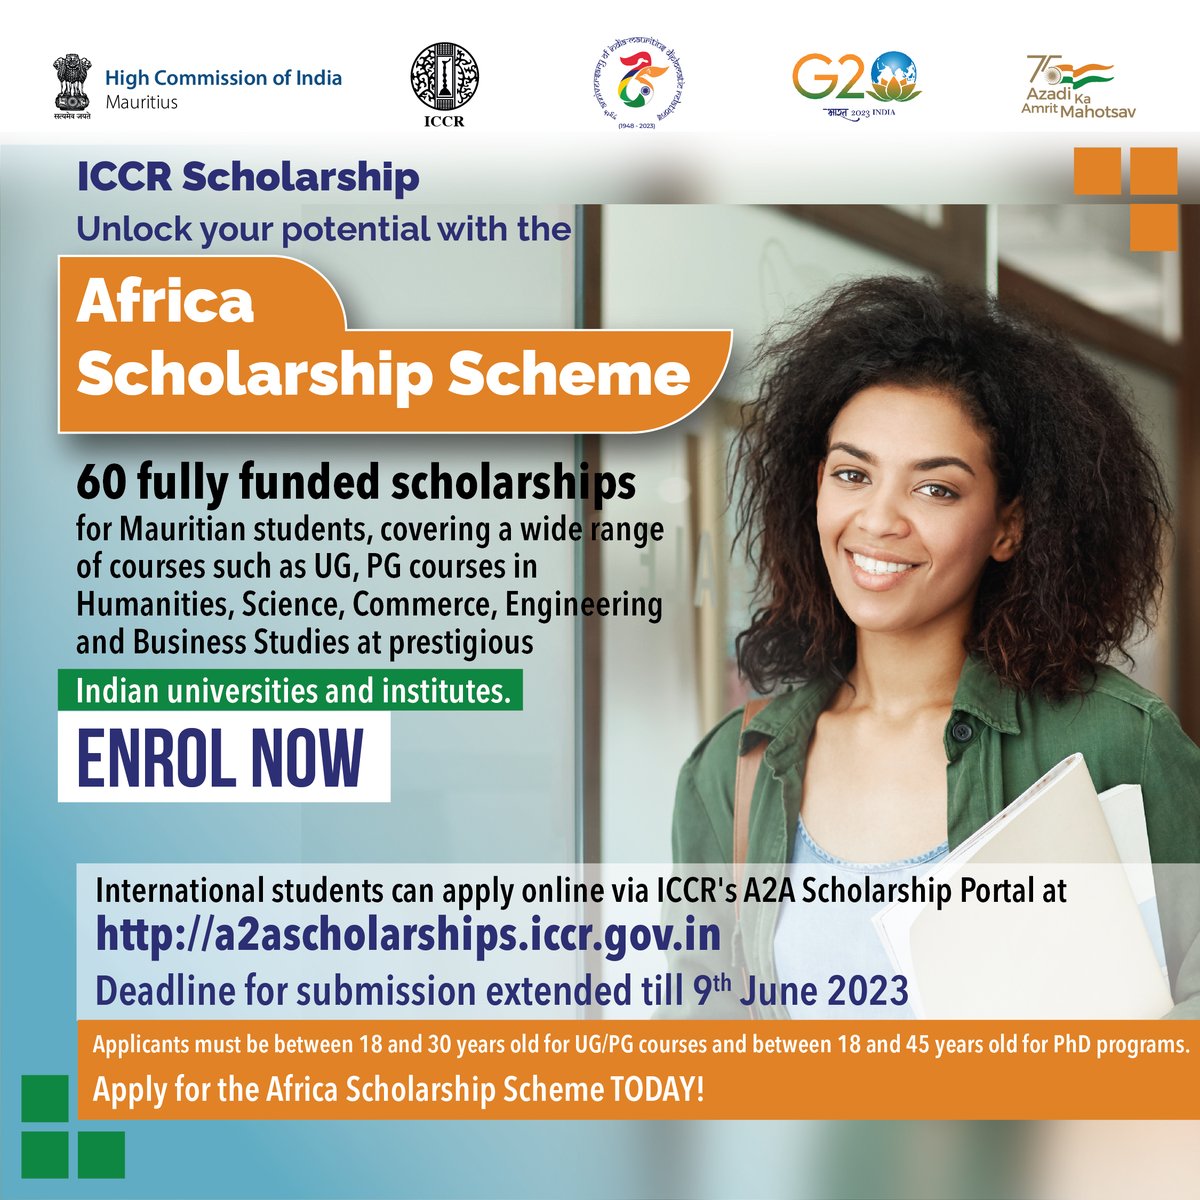 The Africa Scholarship Scheme has been extended!
We are thrilled to announce that the application deadline for this fully funded scholarship scheme has been extended till 𝟗𝐭𝐡 𝐉𝐮𝐧𝐞 𝟐𝟎𝟐𝟑.
Apply now through ICCR's #A2AScholarship Portal: a2ascholarships.iccr.gov.in